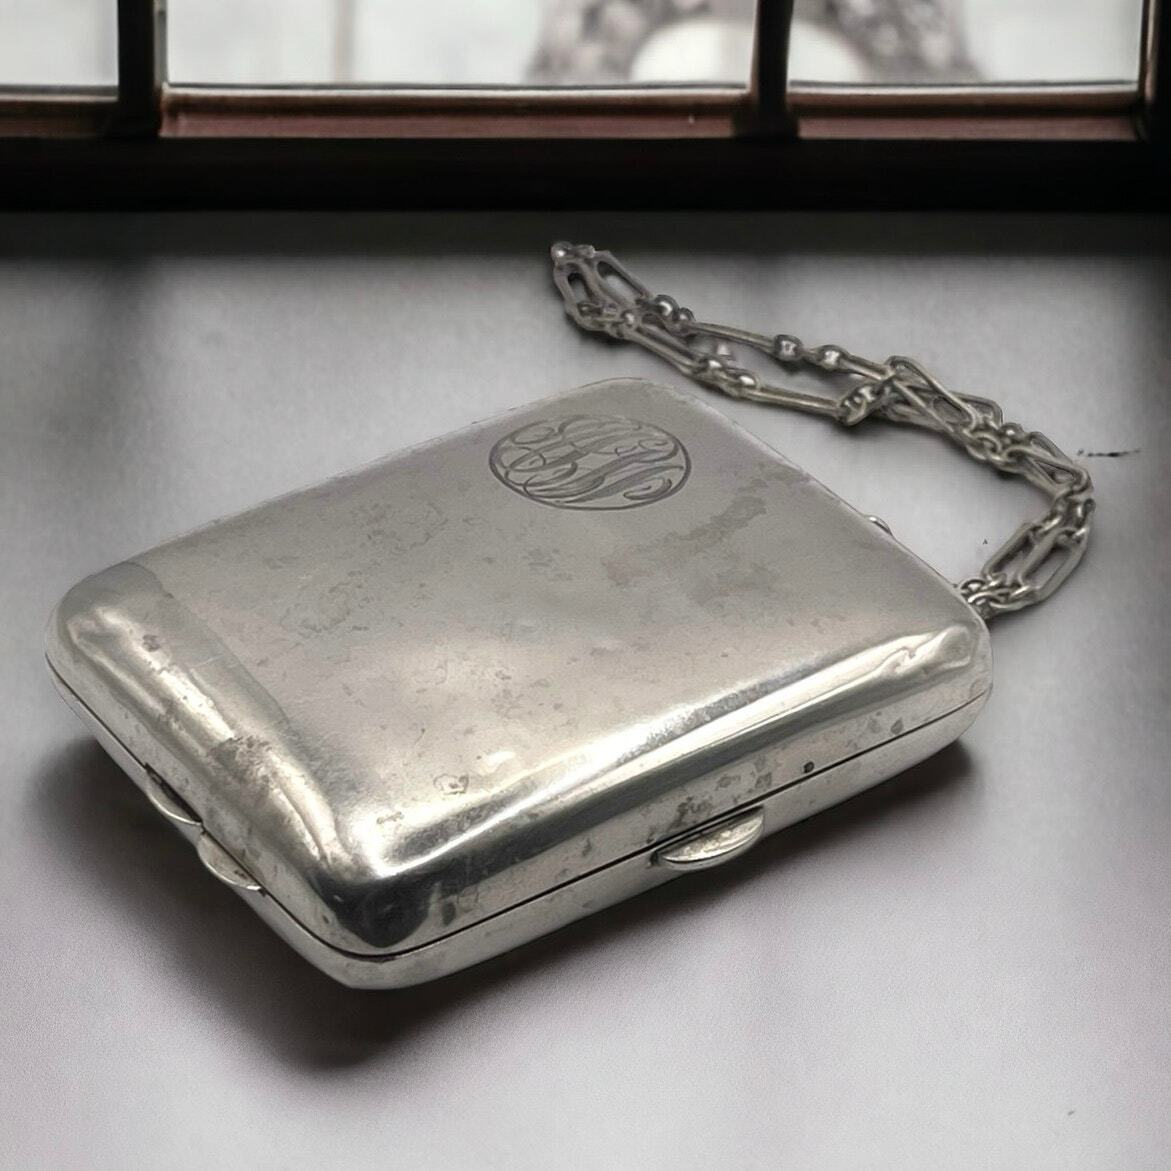 Engraved Sterling Silver Cigarette, Coin, Mirror, Compact, Chain Purse, 160.9g